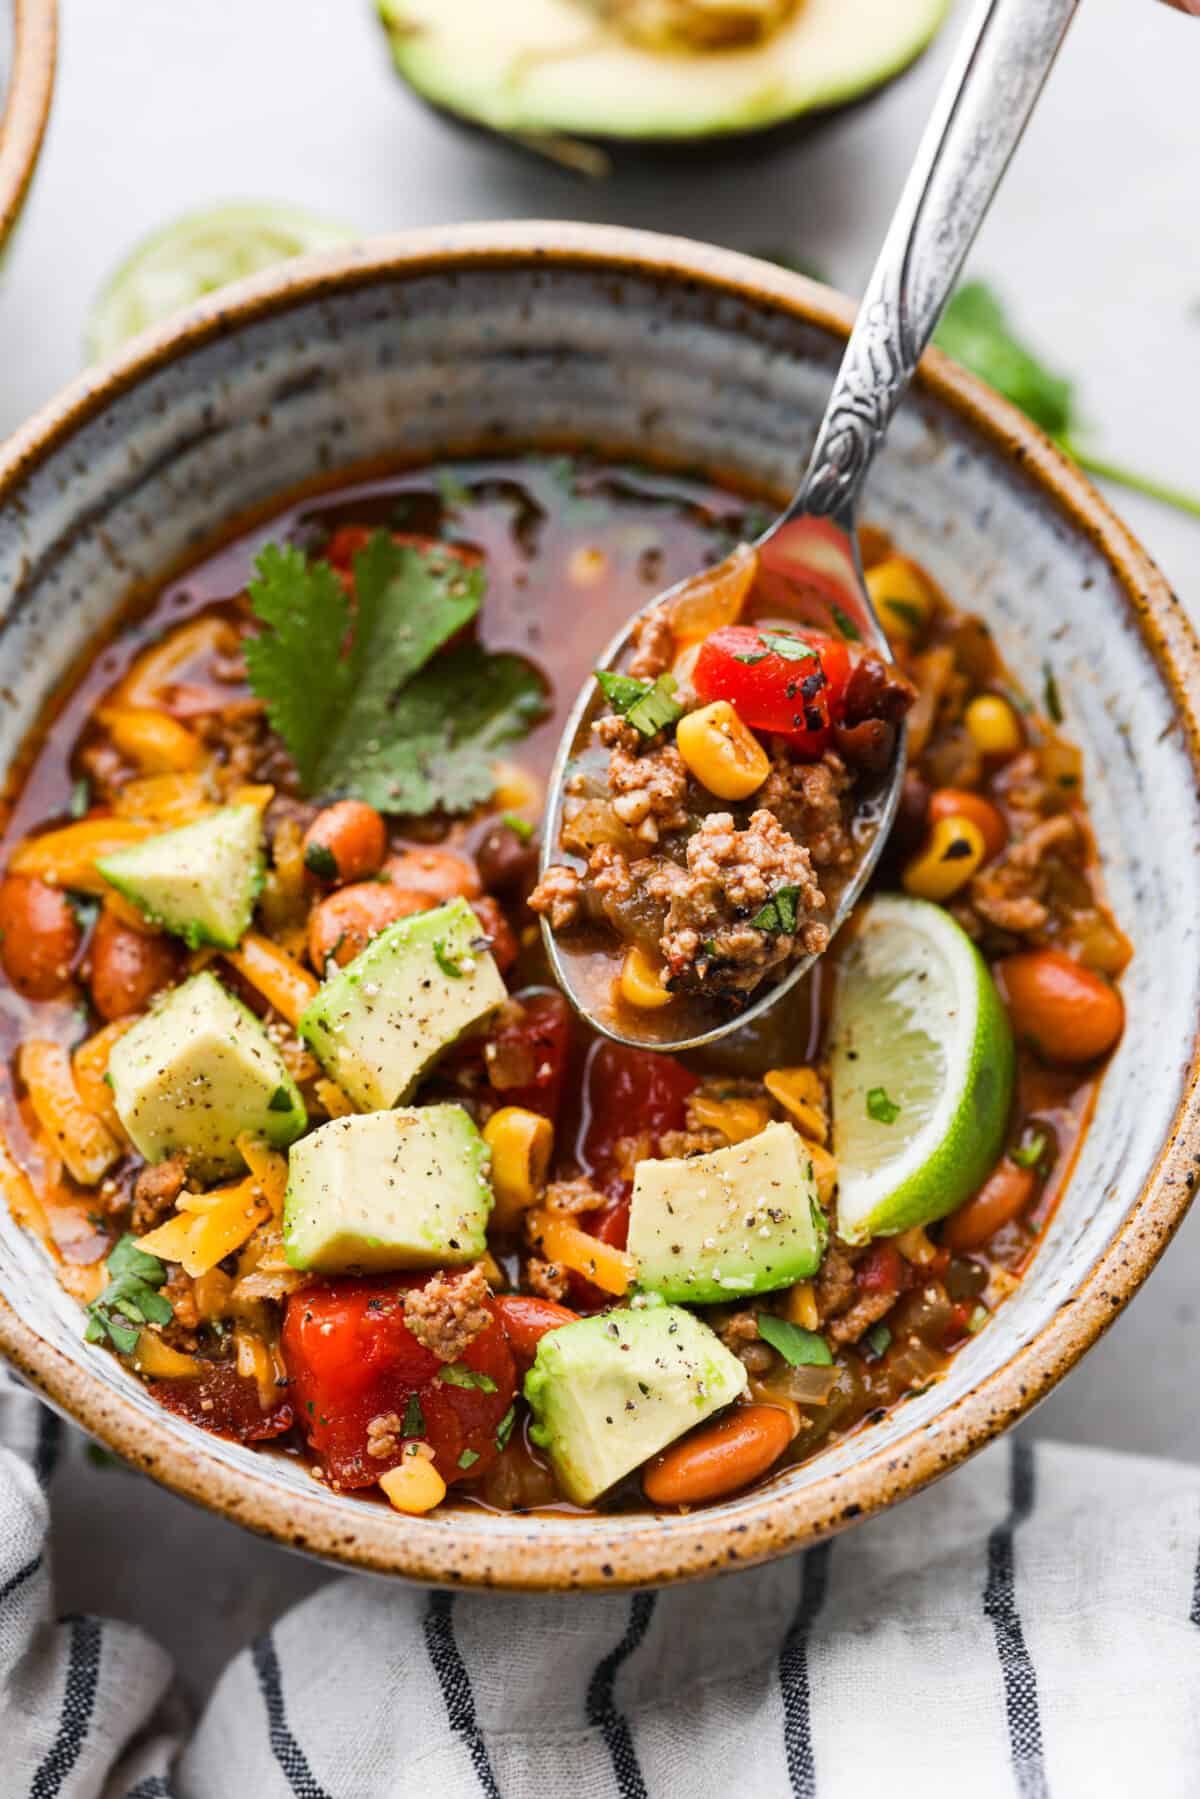 Closeup of a serving of taco soup, with ground beef, broth, and vegetables in a metal spoon.